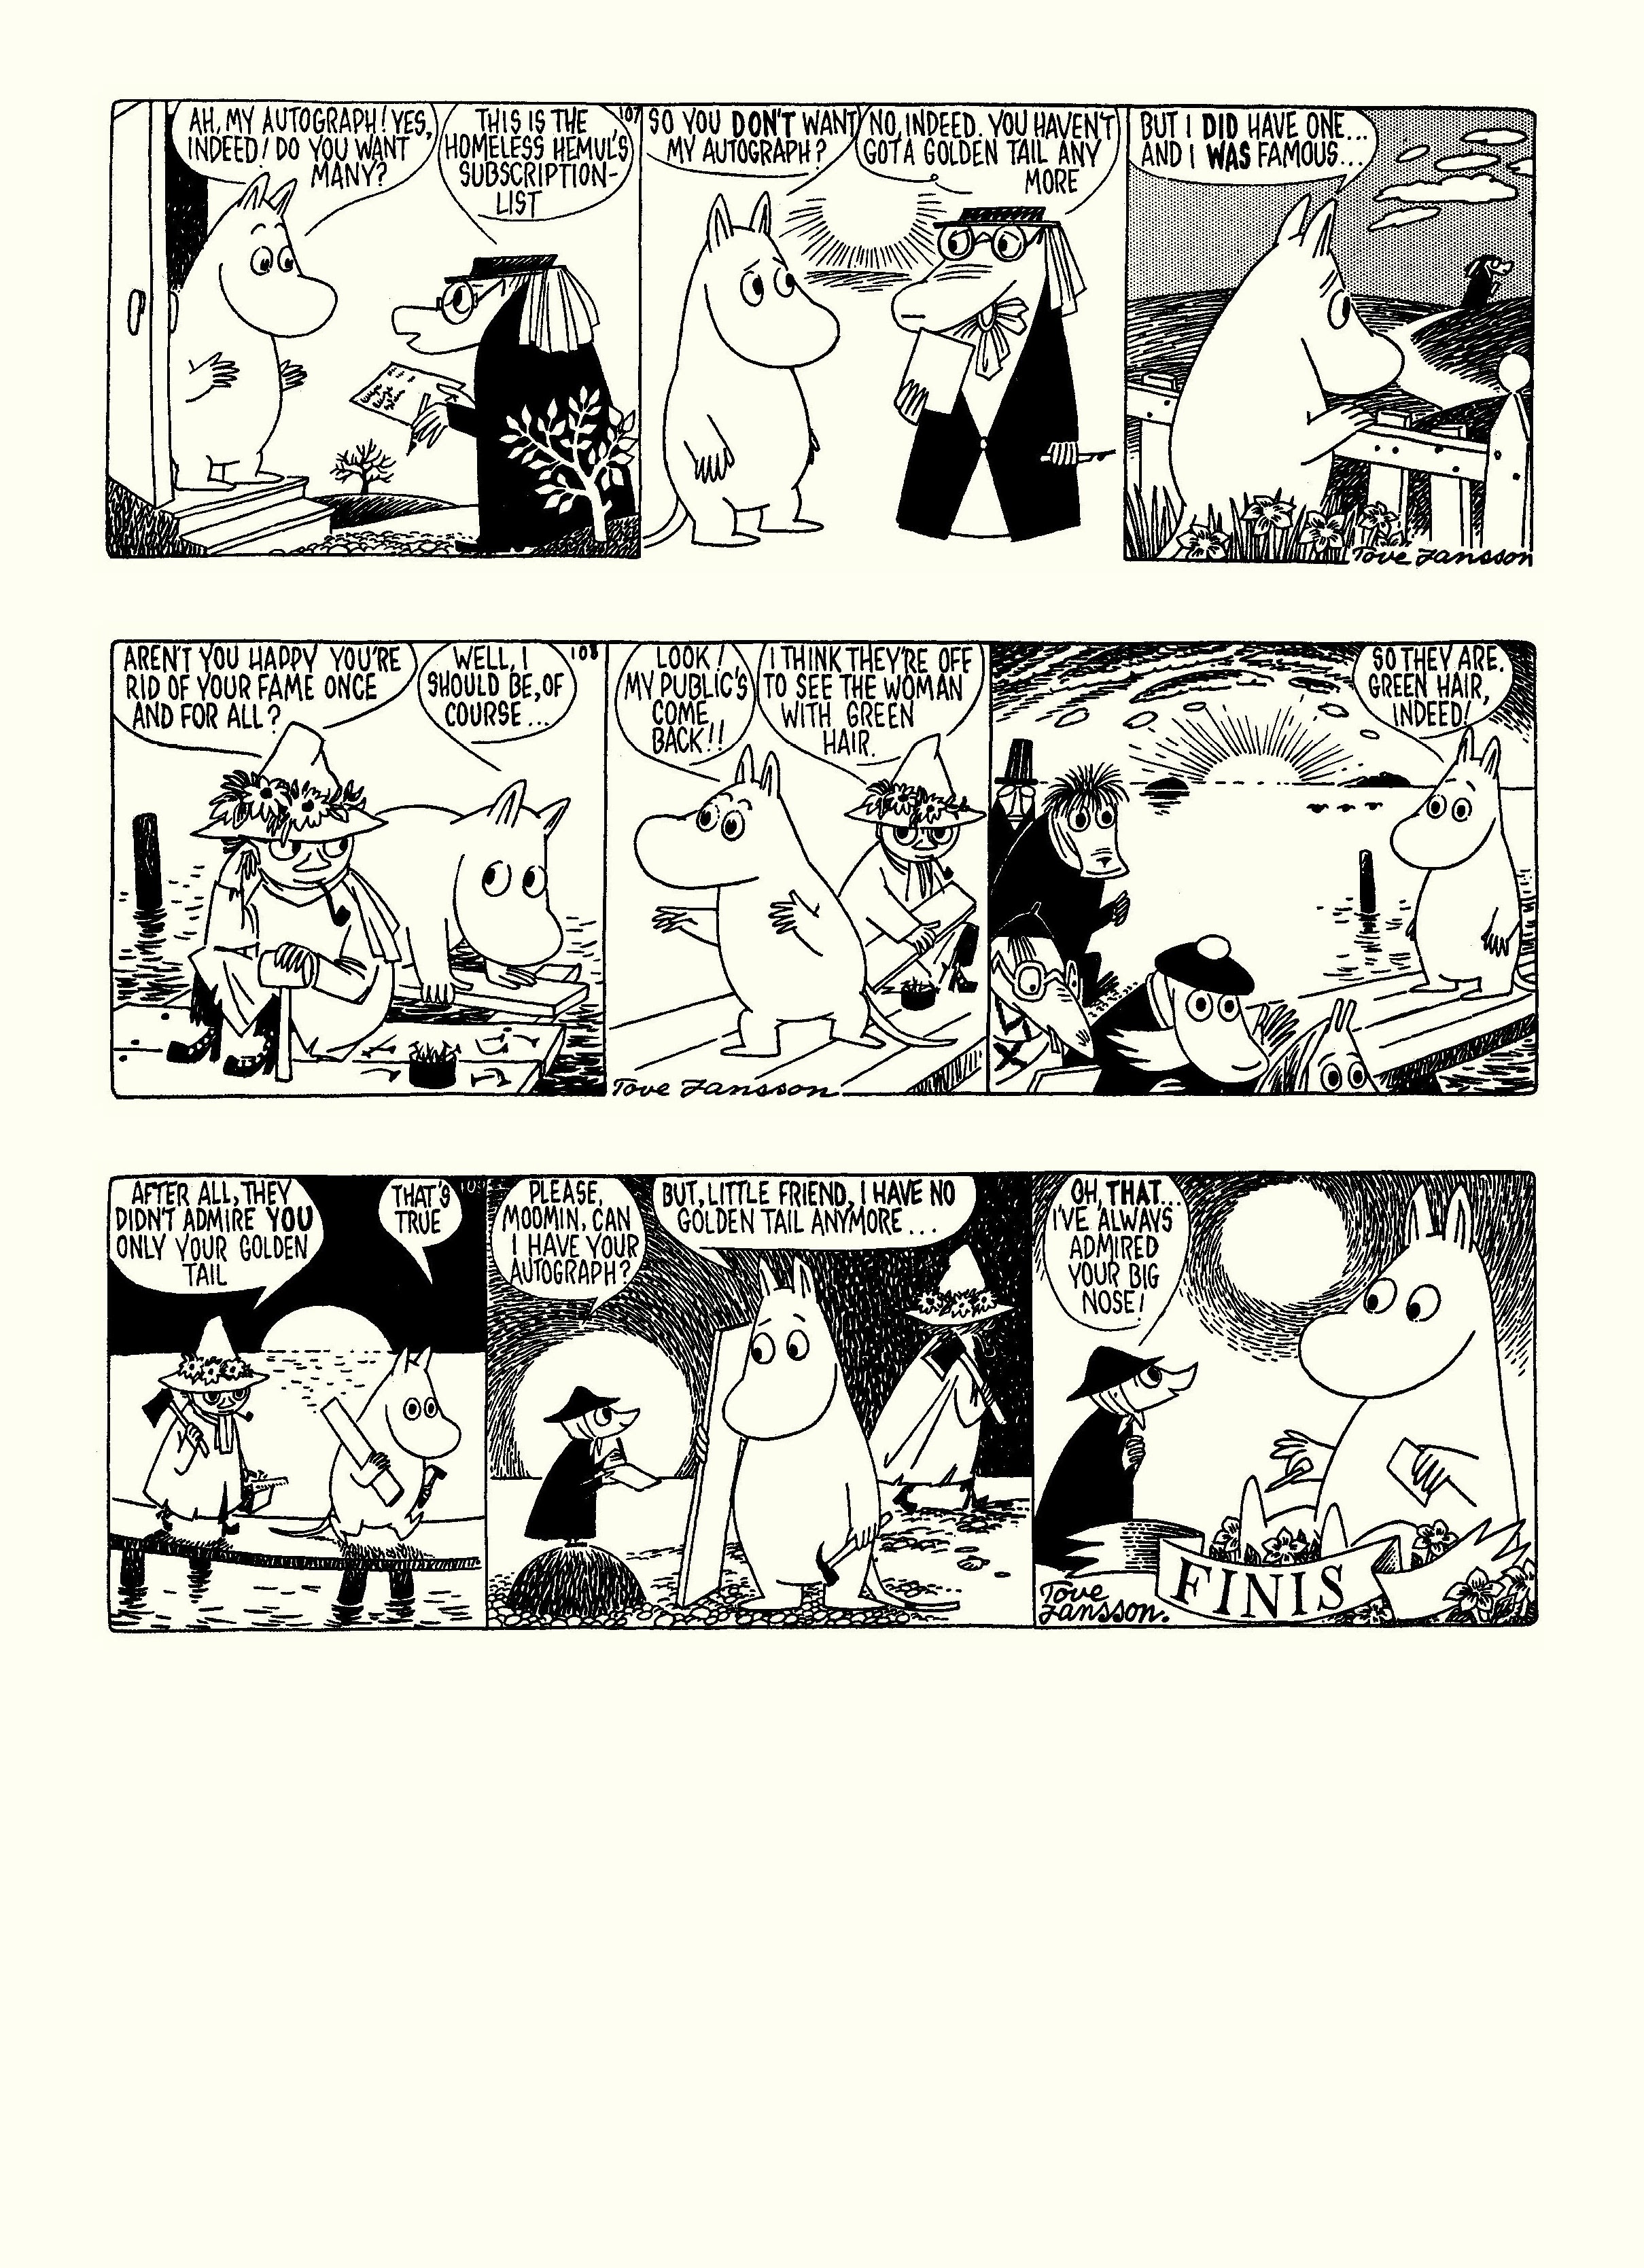 Read online Moomin: The Complete Tove Jansson Comic Strip comic -  Issue # TPB 4 - 106